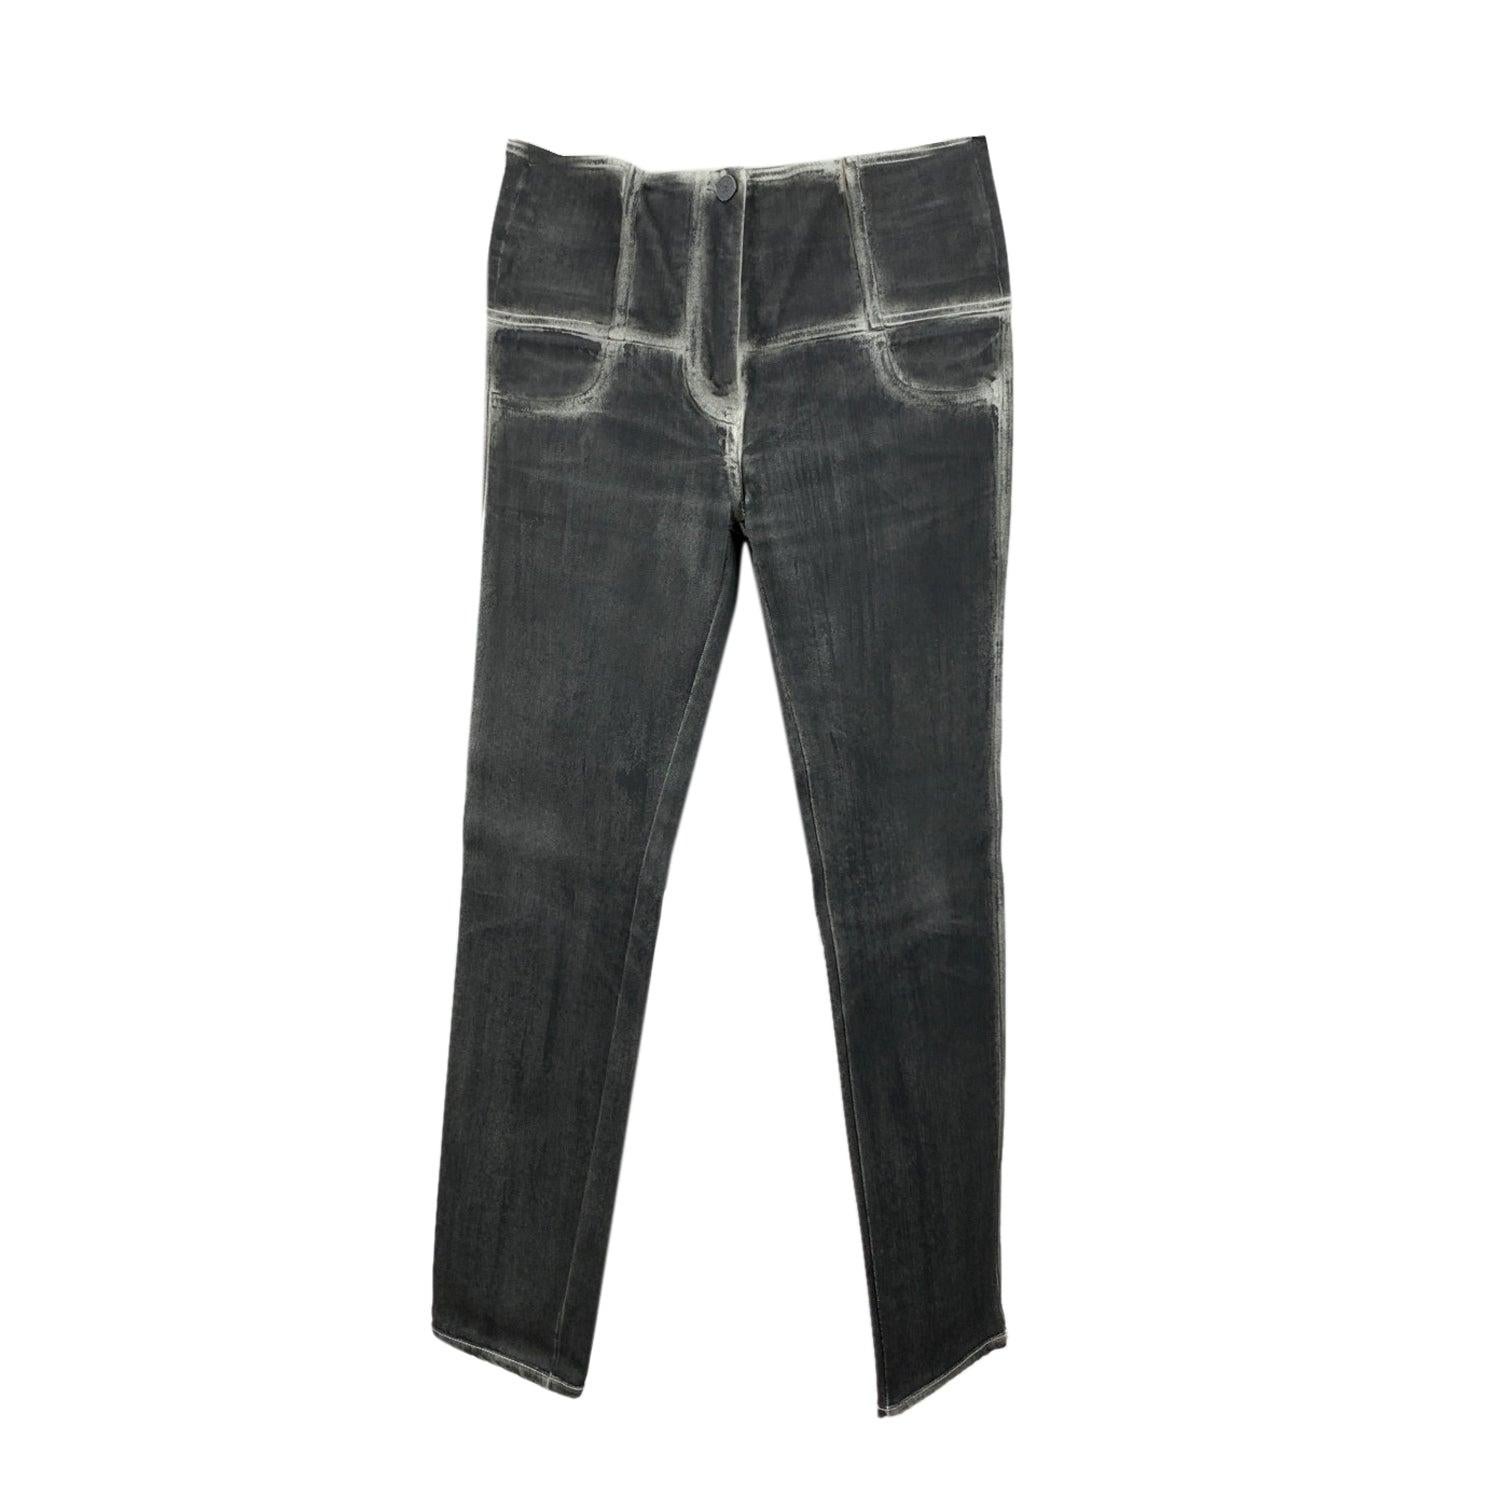 Chanel Grey Washed Out Denim Jeans Pants with Zip Size 38 FR For Sale